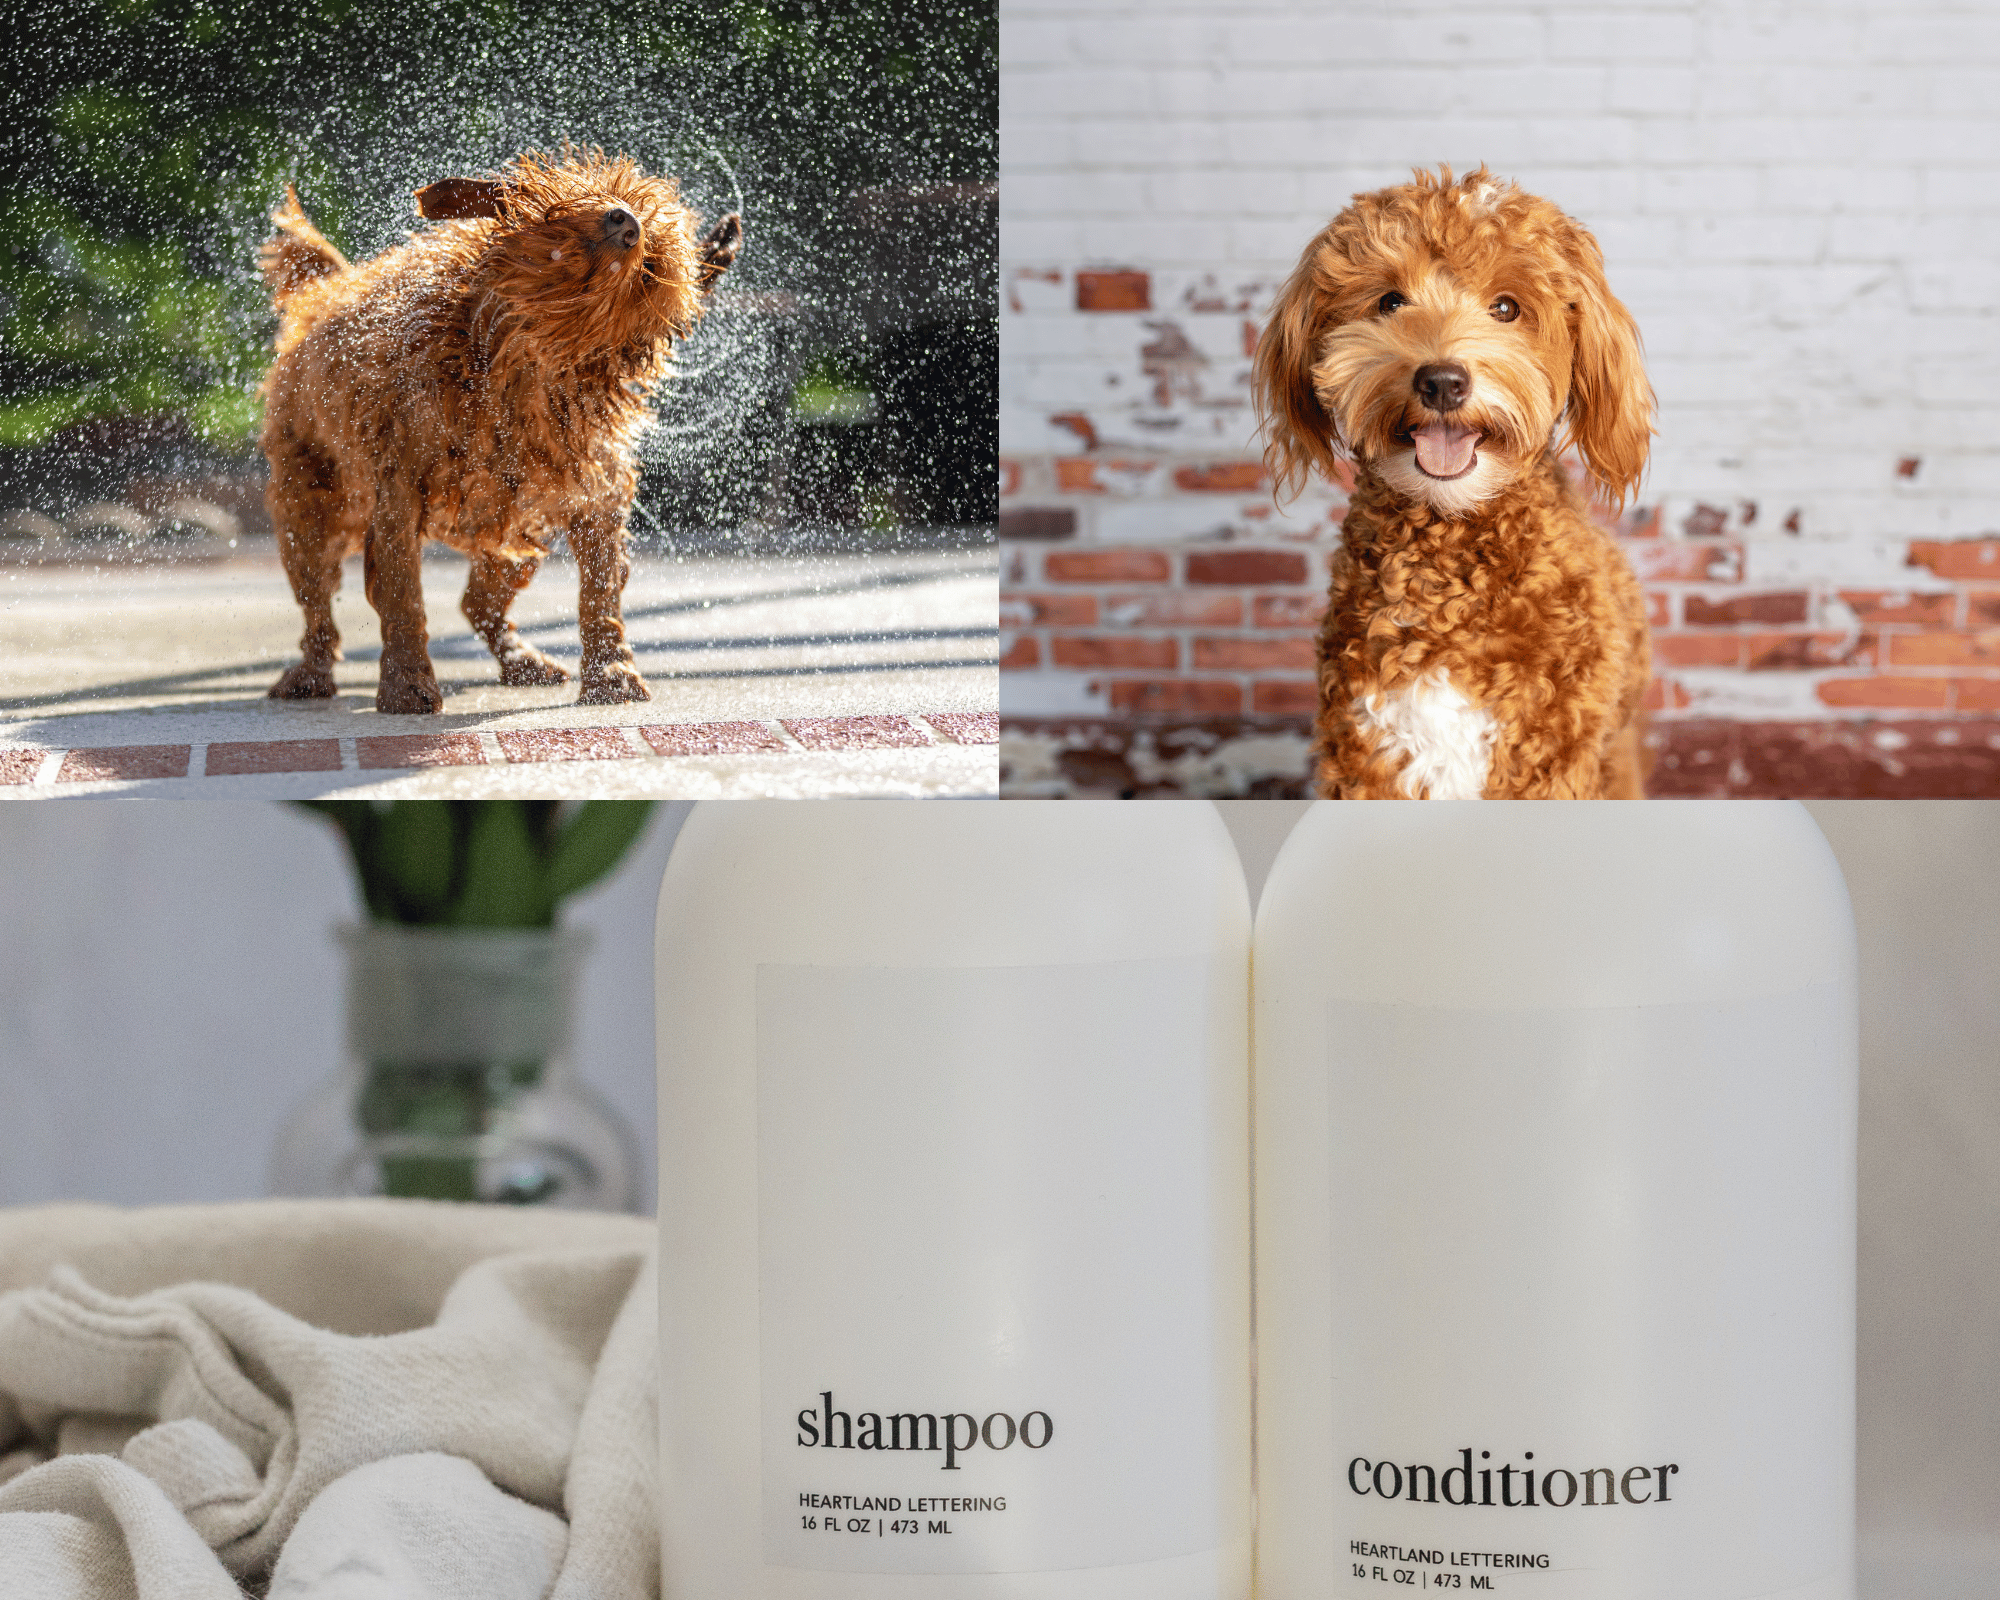 Can You Use Regular Shampoo on Goldendoodle?